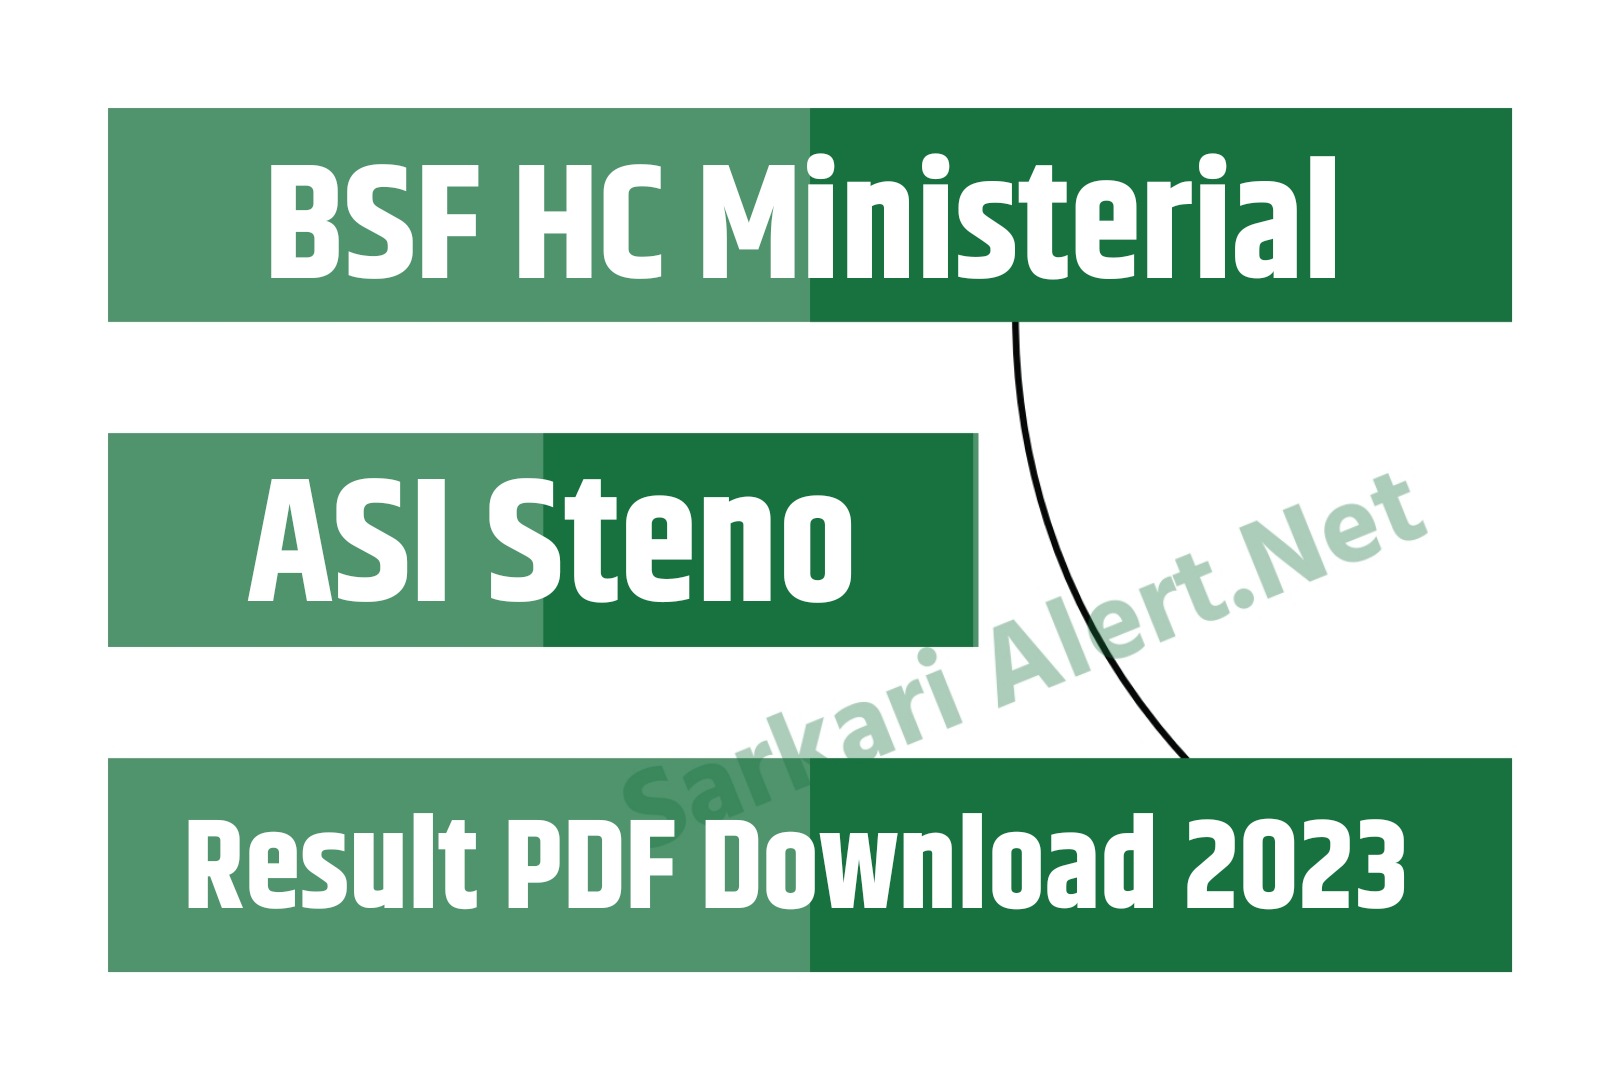 BSF HC Ministerial ASI Steno Result 2023